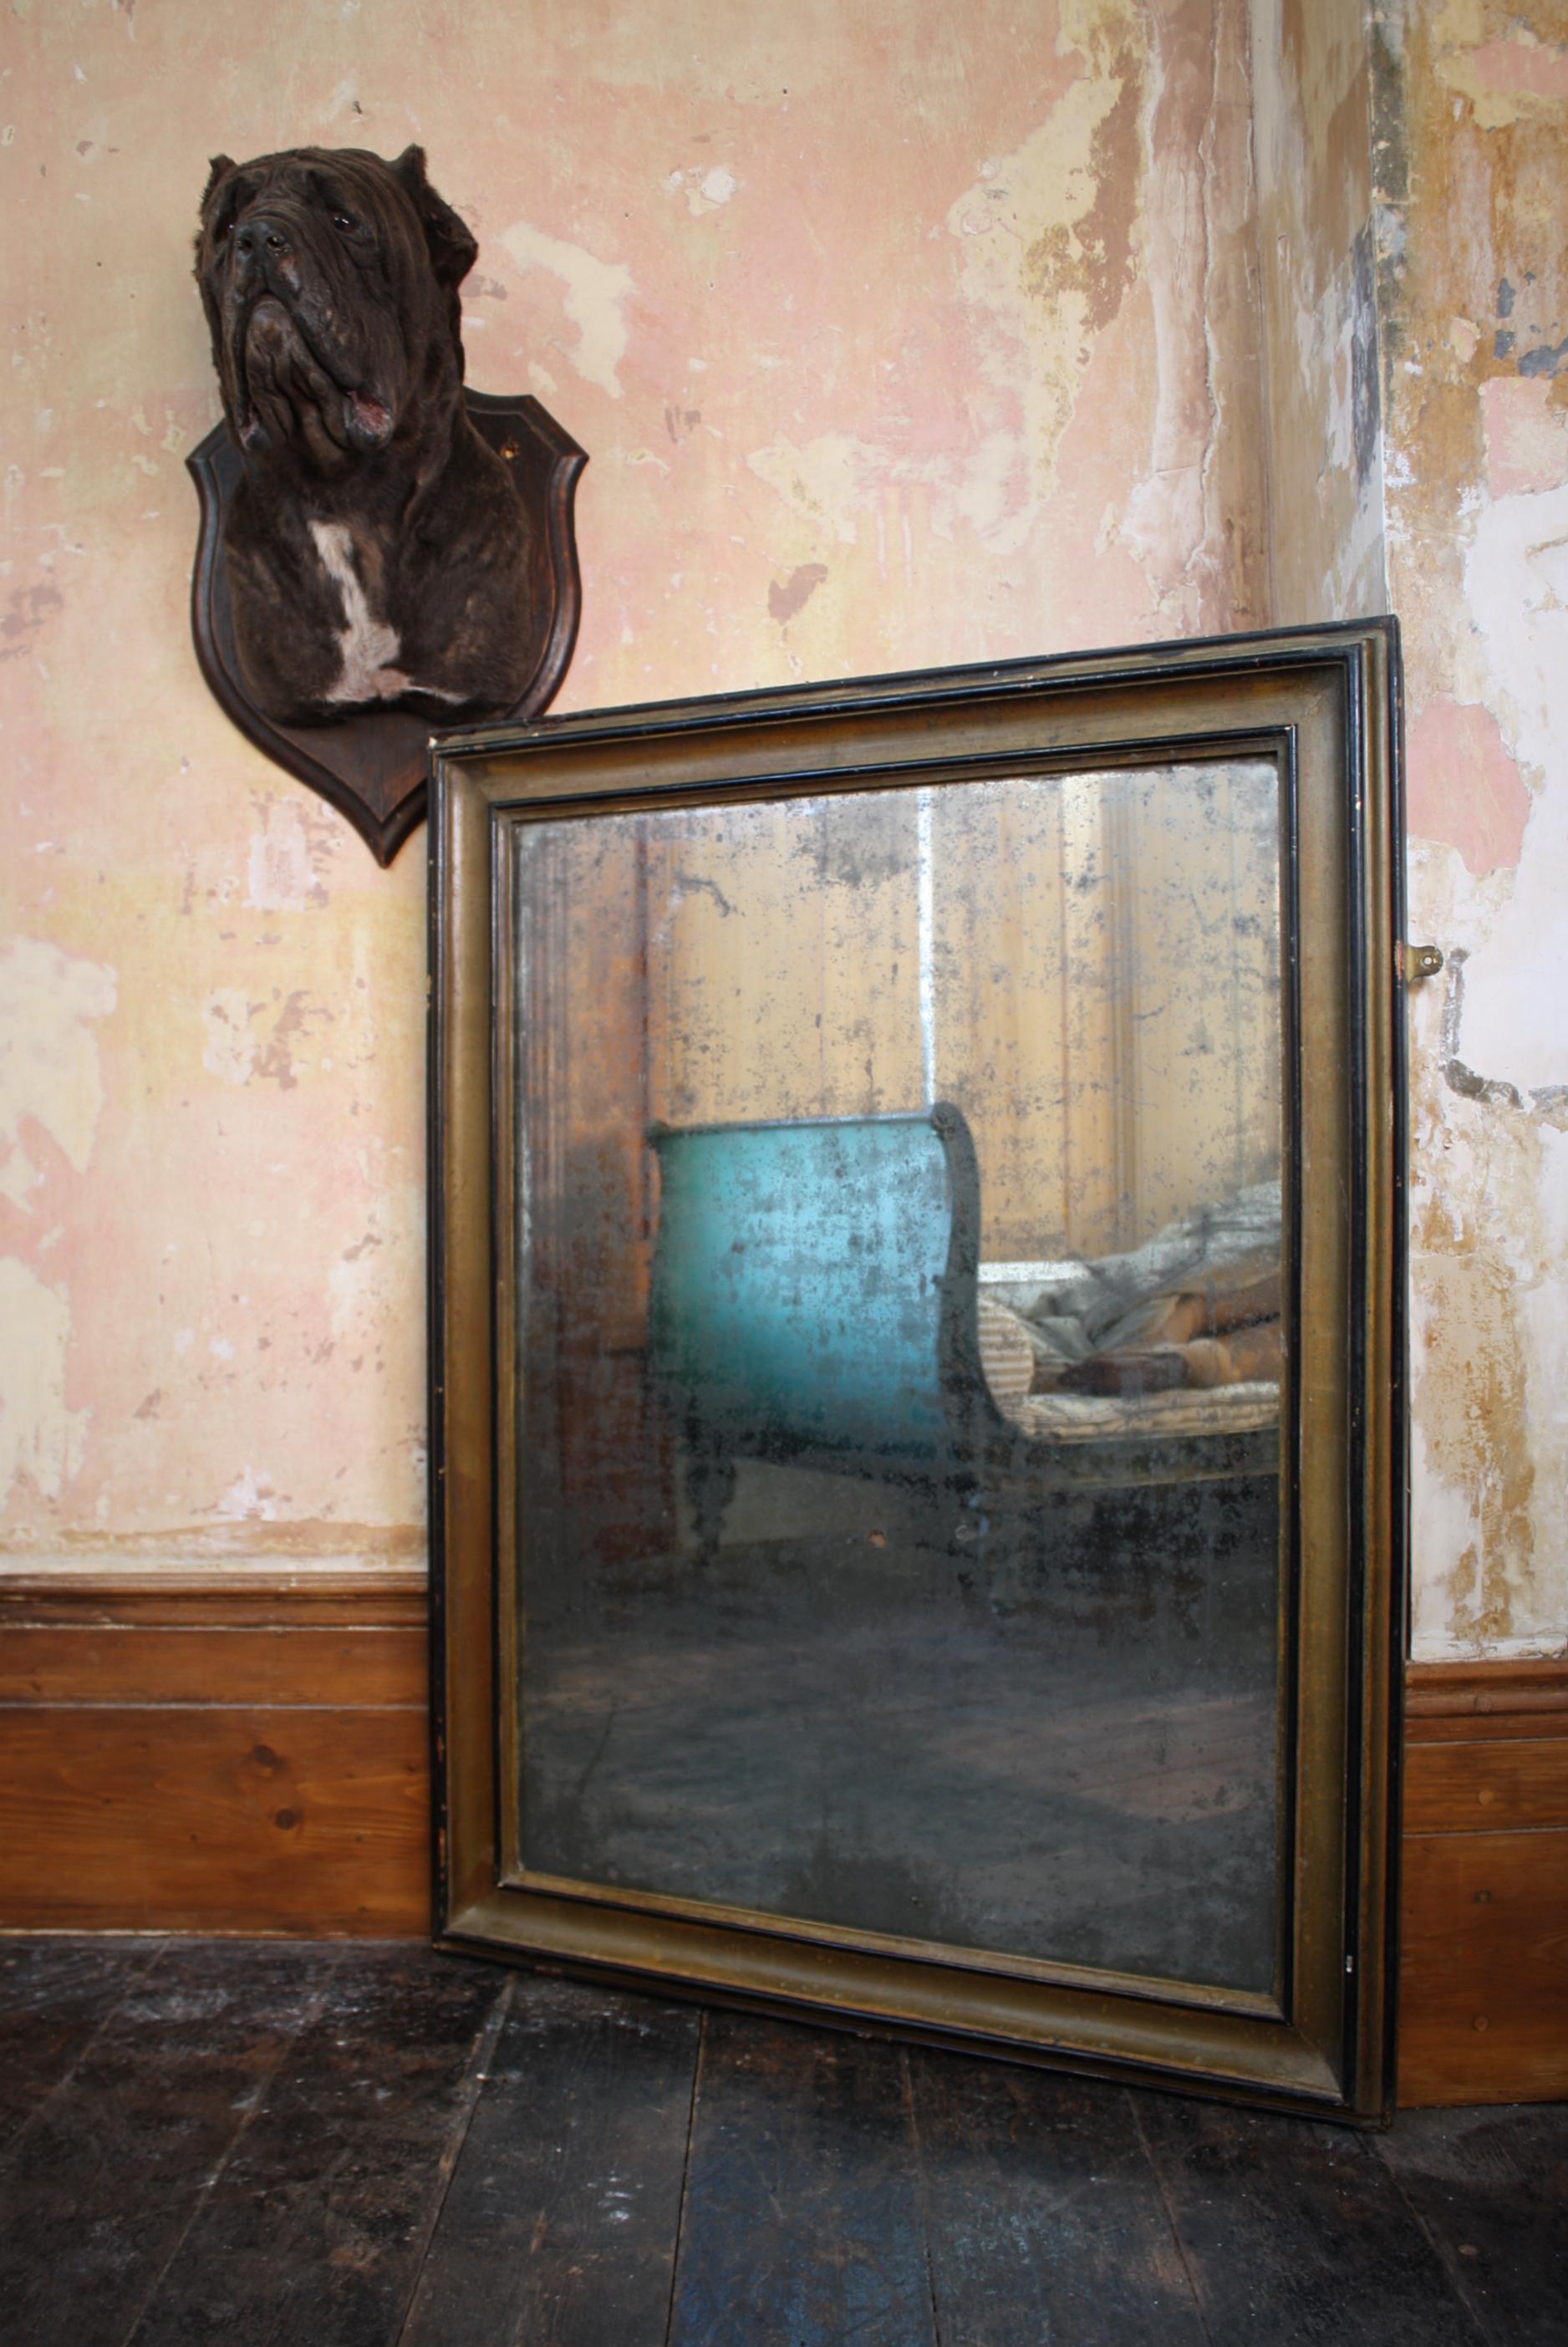 A late 19th century mirror, housed in its original deep carved pine frame.

The mirror was likely from a retail space or the like, the frame has its original pine backing and has been re gilt some time ago. The original gilt work is visible in